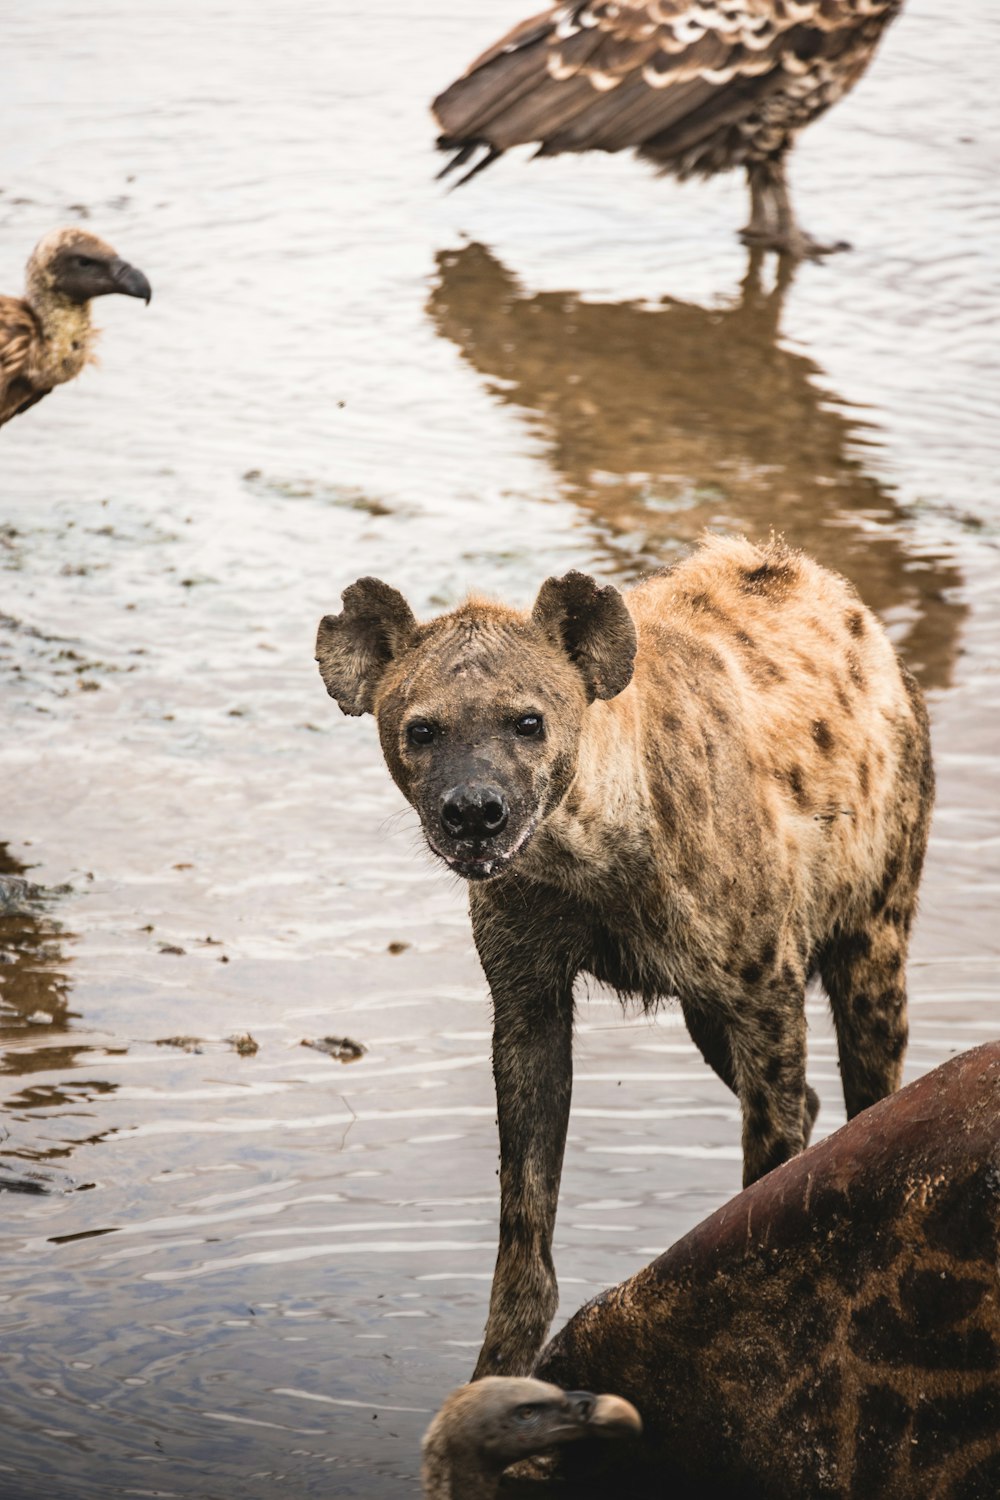 a spotted hyena standing in shallow water with a vulture in the background